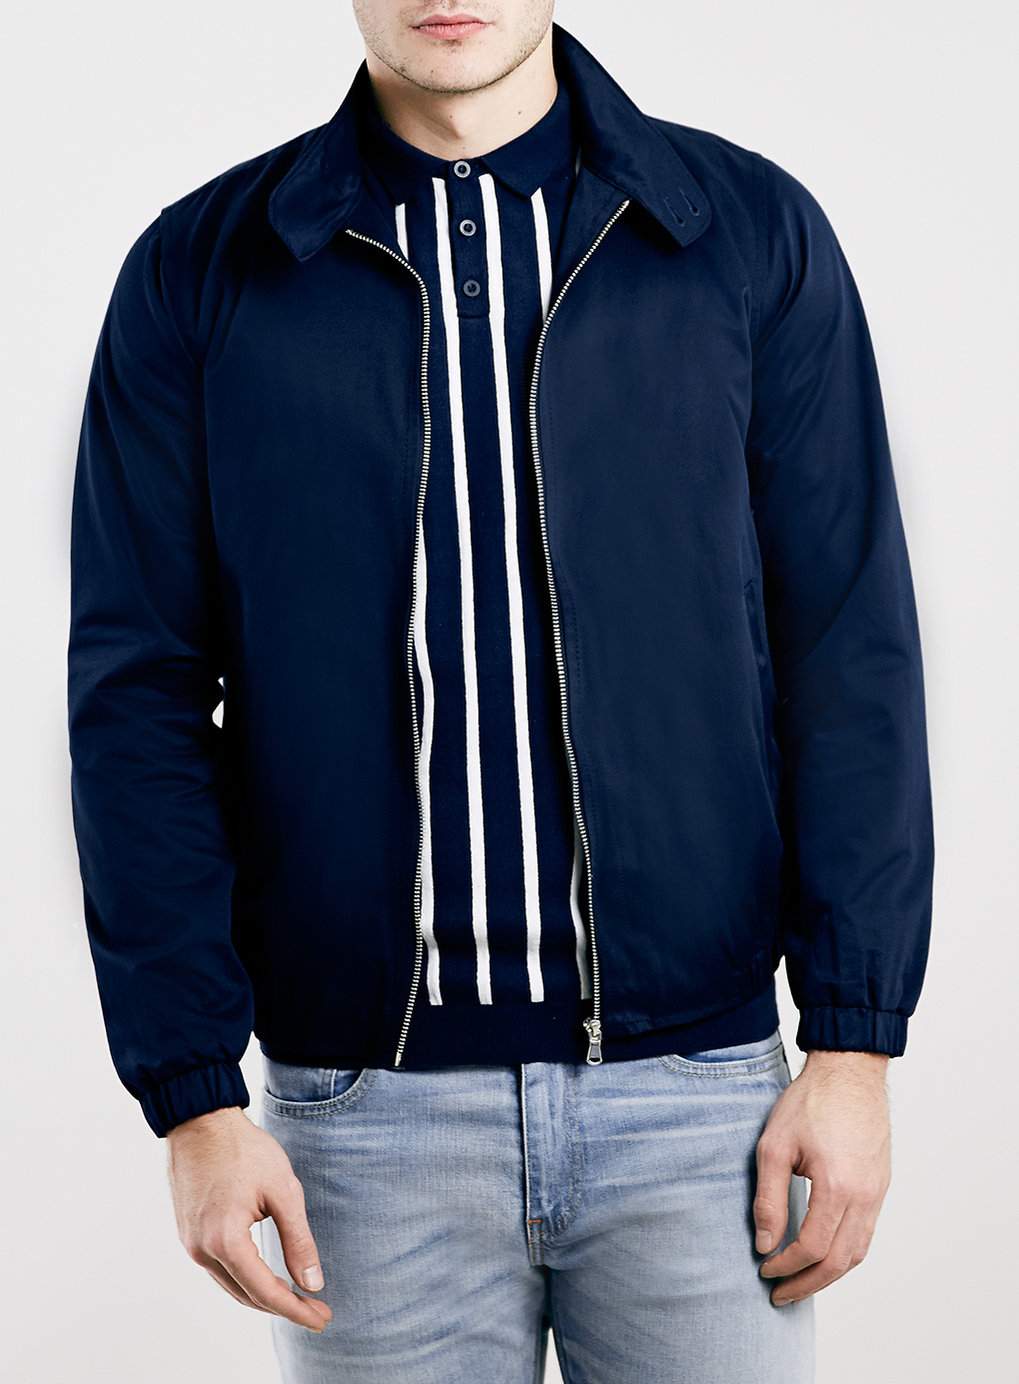 Download Topman Navy Harrington Jacket With Check Lining in Blue ...